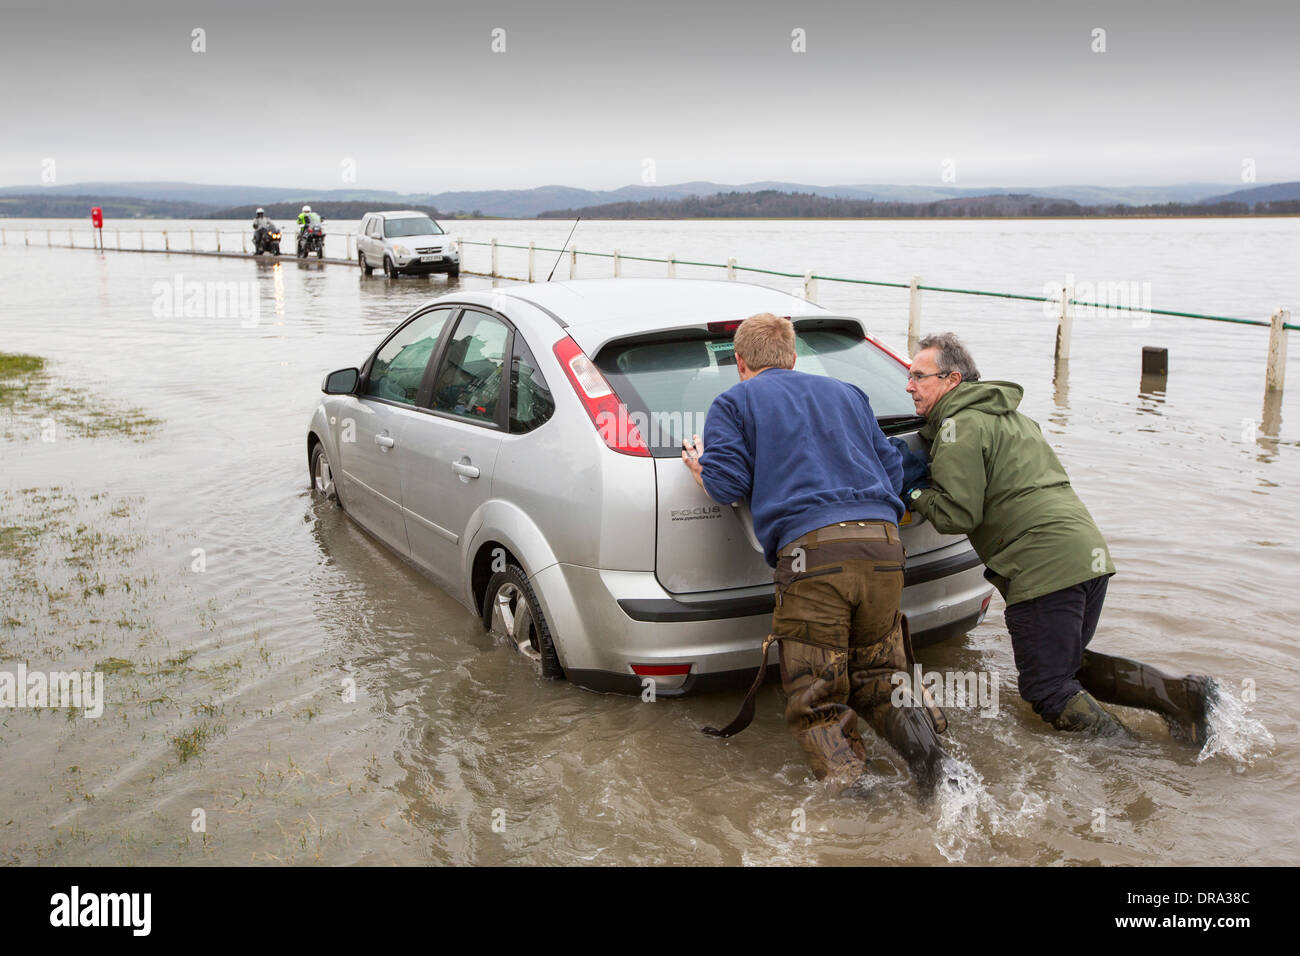 A Car in the flood waters on the road at Storth on the Kent Estuary in Cumbria, UK, during the January 2014 storms Stock Photo